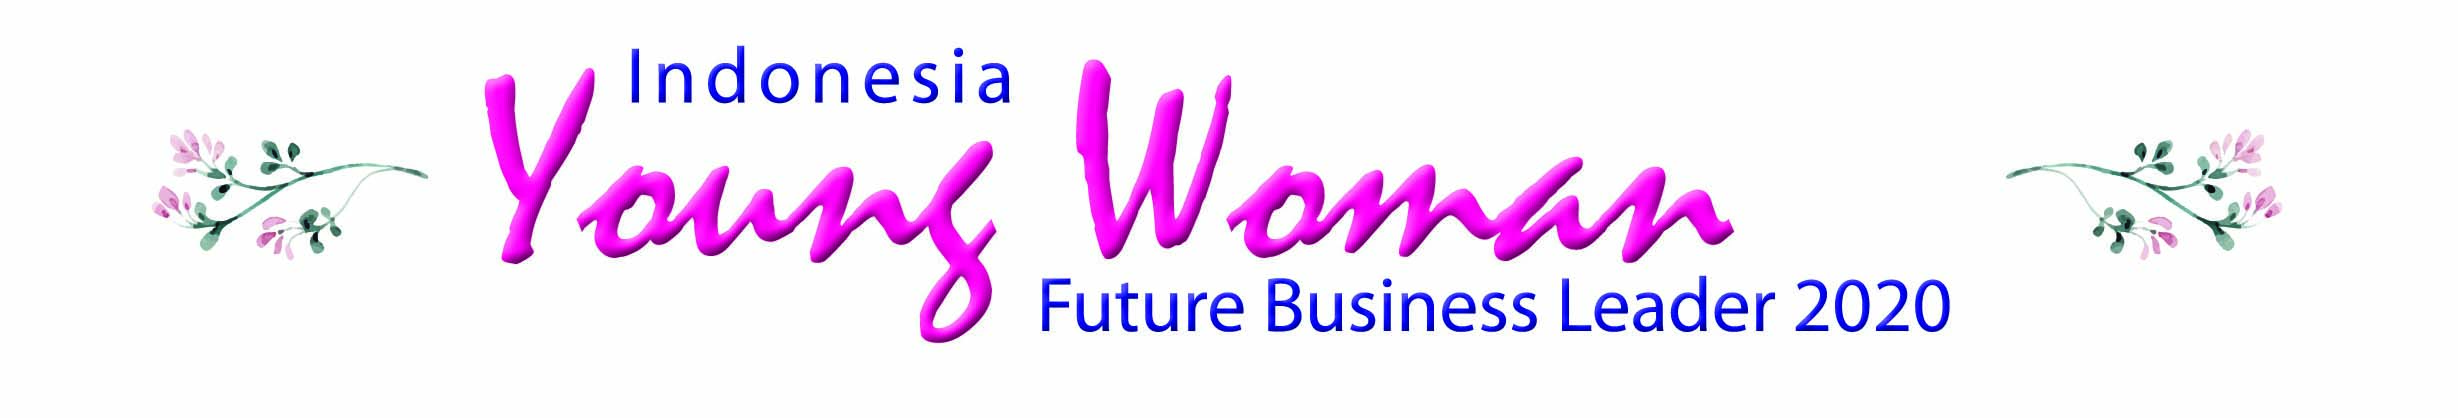 Indonesia Young Women Future Business Leader 2020